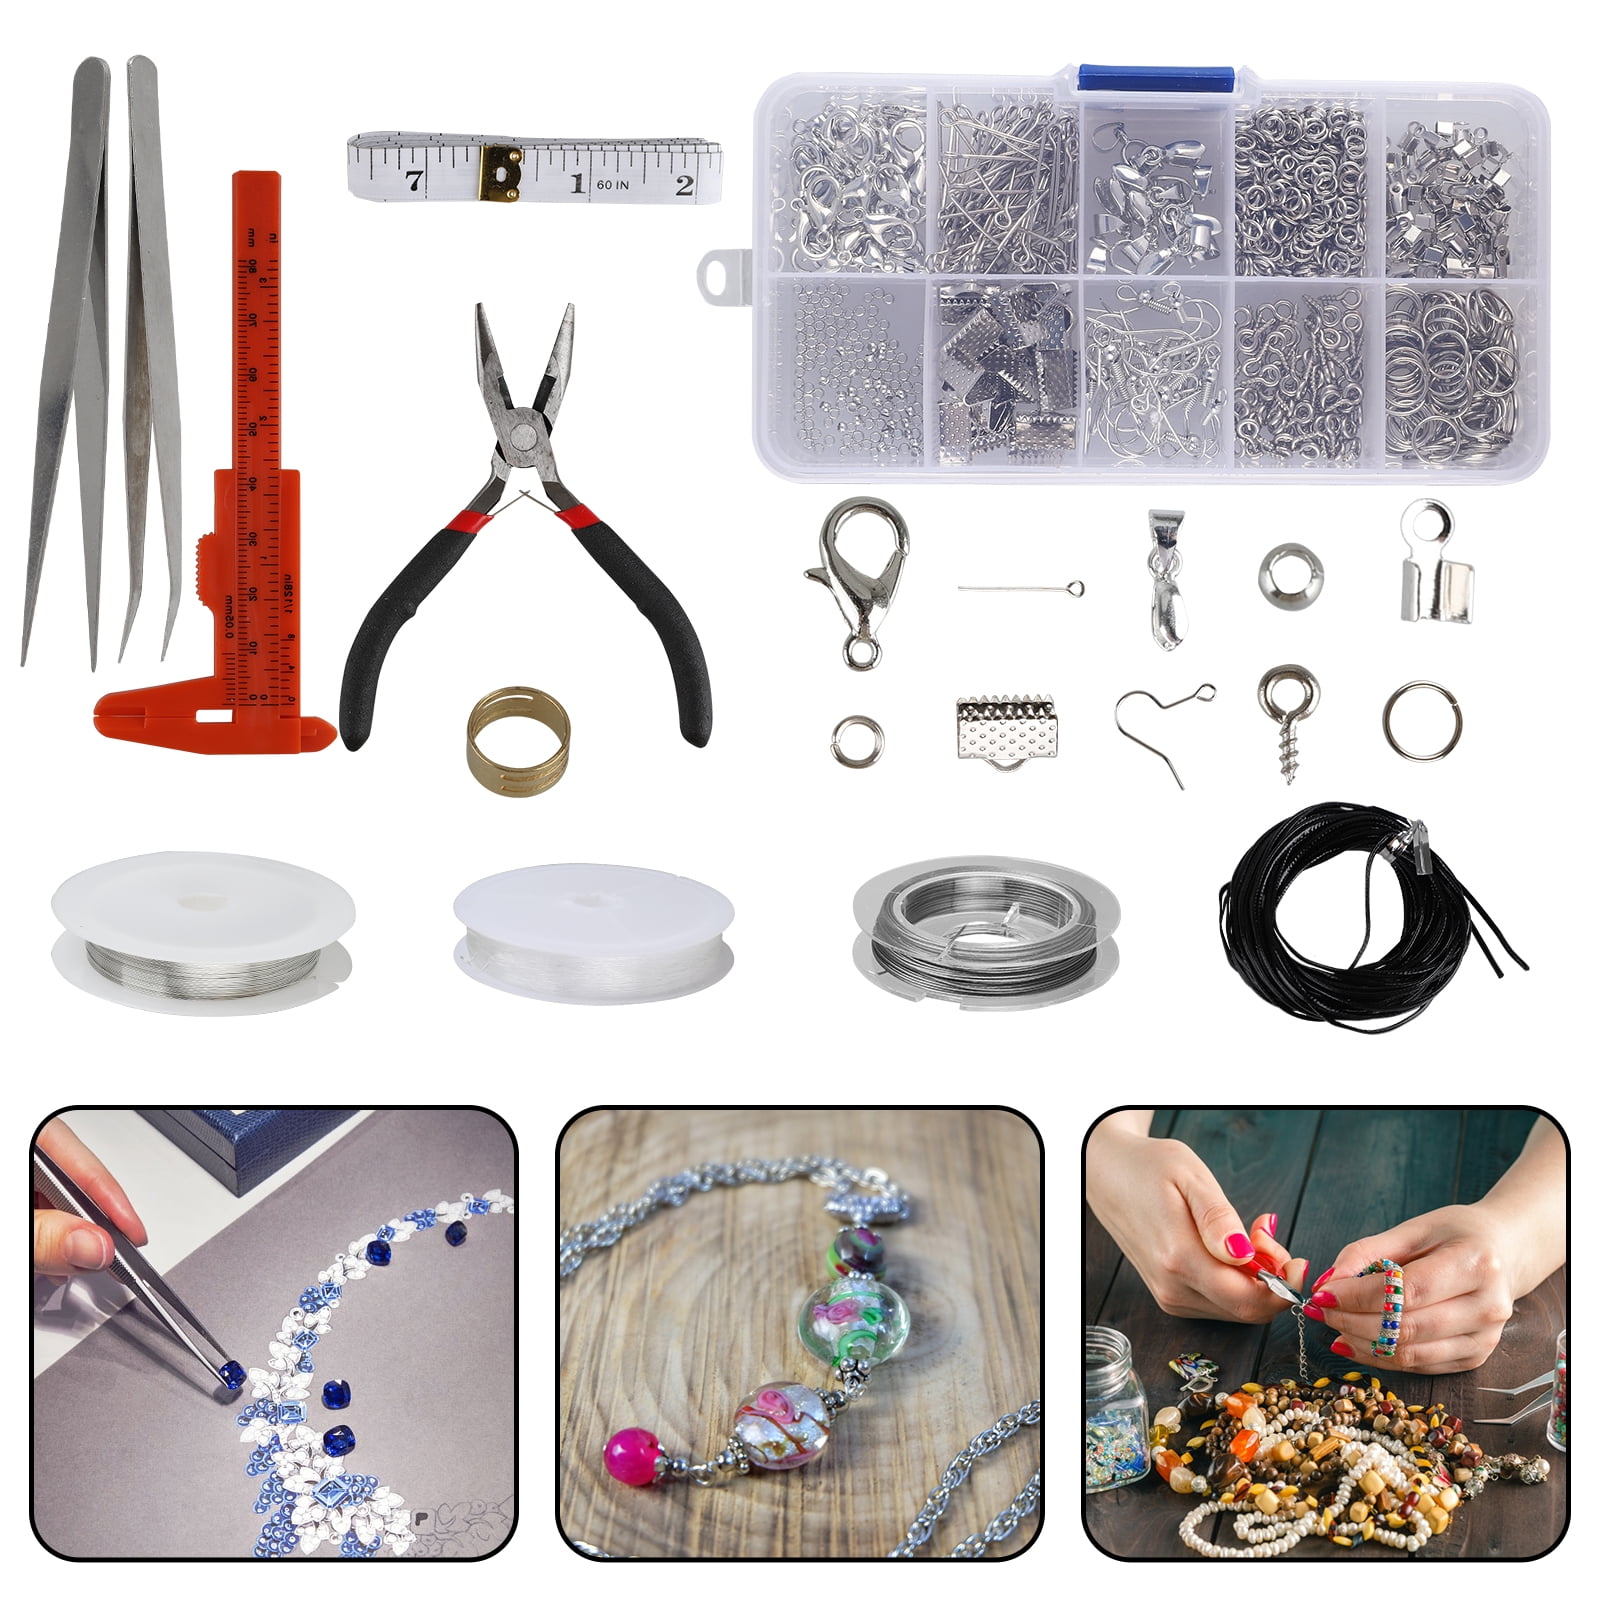 Professional Gold and Silver Testing Kit $69.95  Wire Jewelry Jewelry  Making Supplies